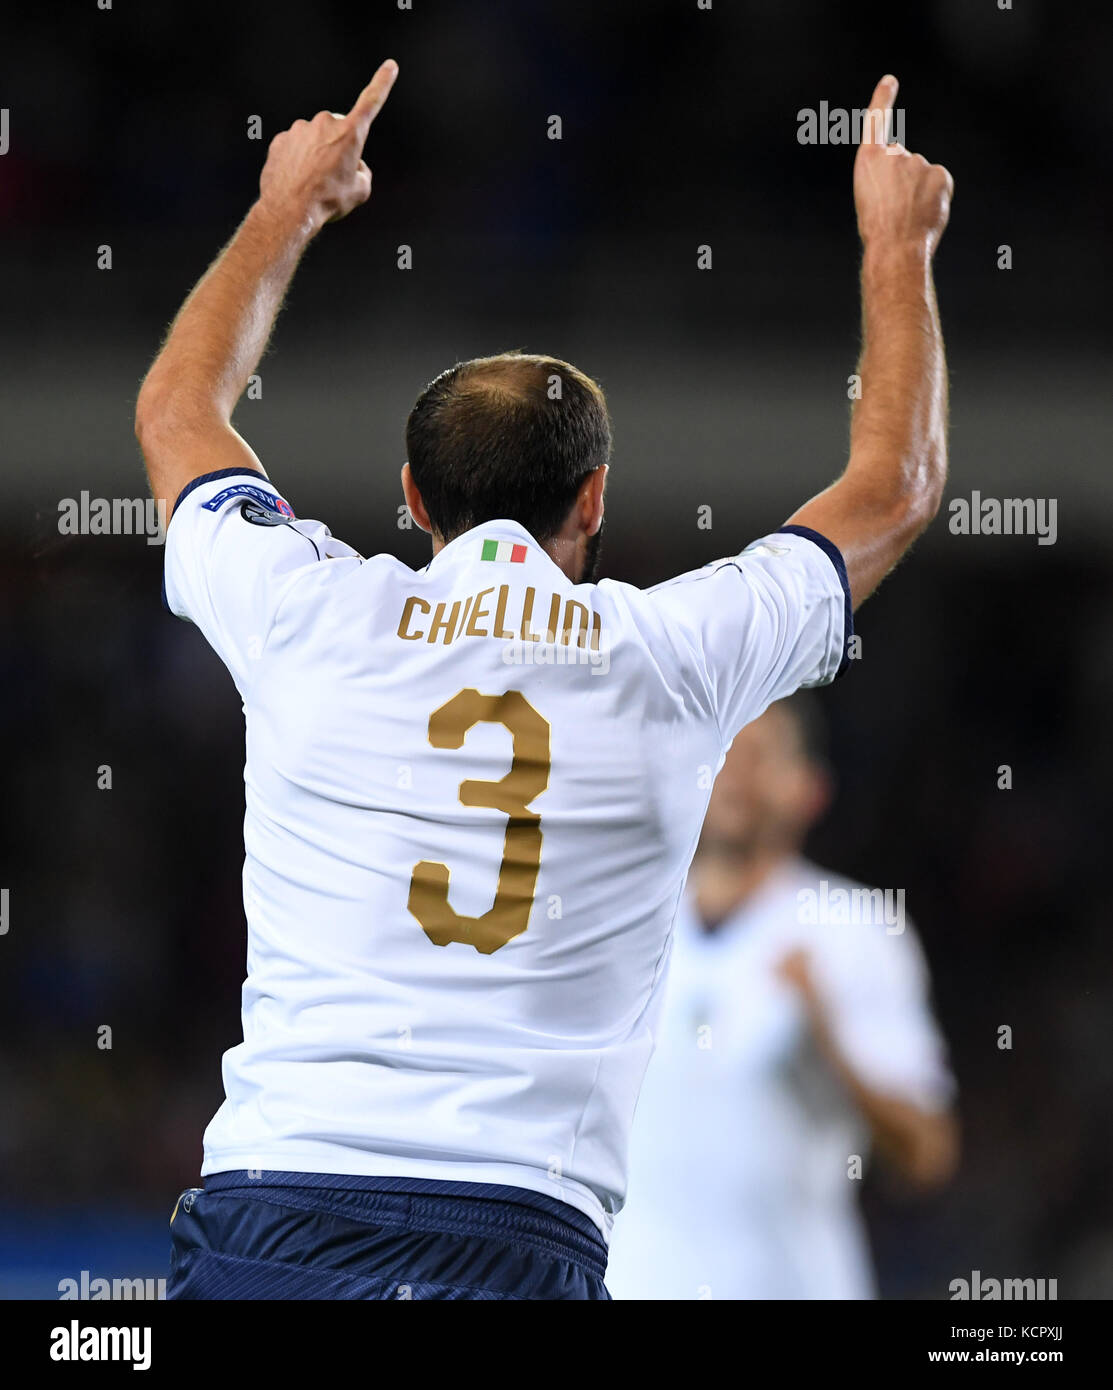 Turin, Italy. 6th Oct, 2017. Giorgio Chiellini of Italy celebrates after scoring during the FIFA 2018 World Cup Qualifier match between Italy and Macedonia in Turin, Italy, on Oct. 6, 2017. The game ended with a 1-1 draw. Credit: Alberto Lingria/Xinhua/Alamy Live News Stock Photo